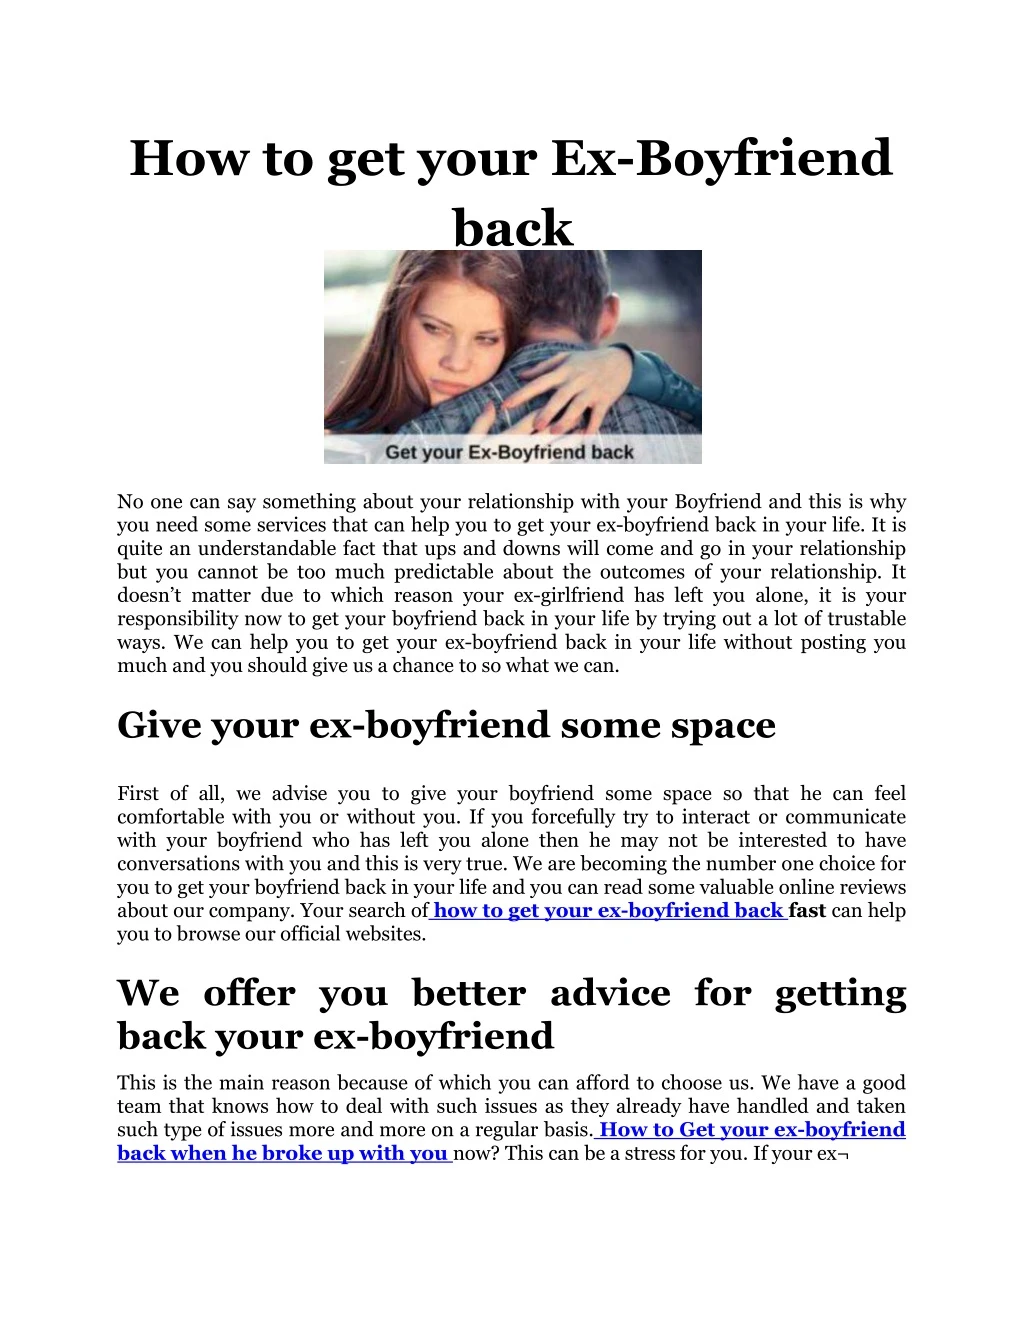 how to get your ex boyfriend back